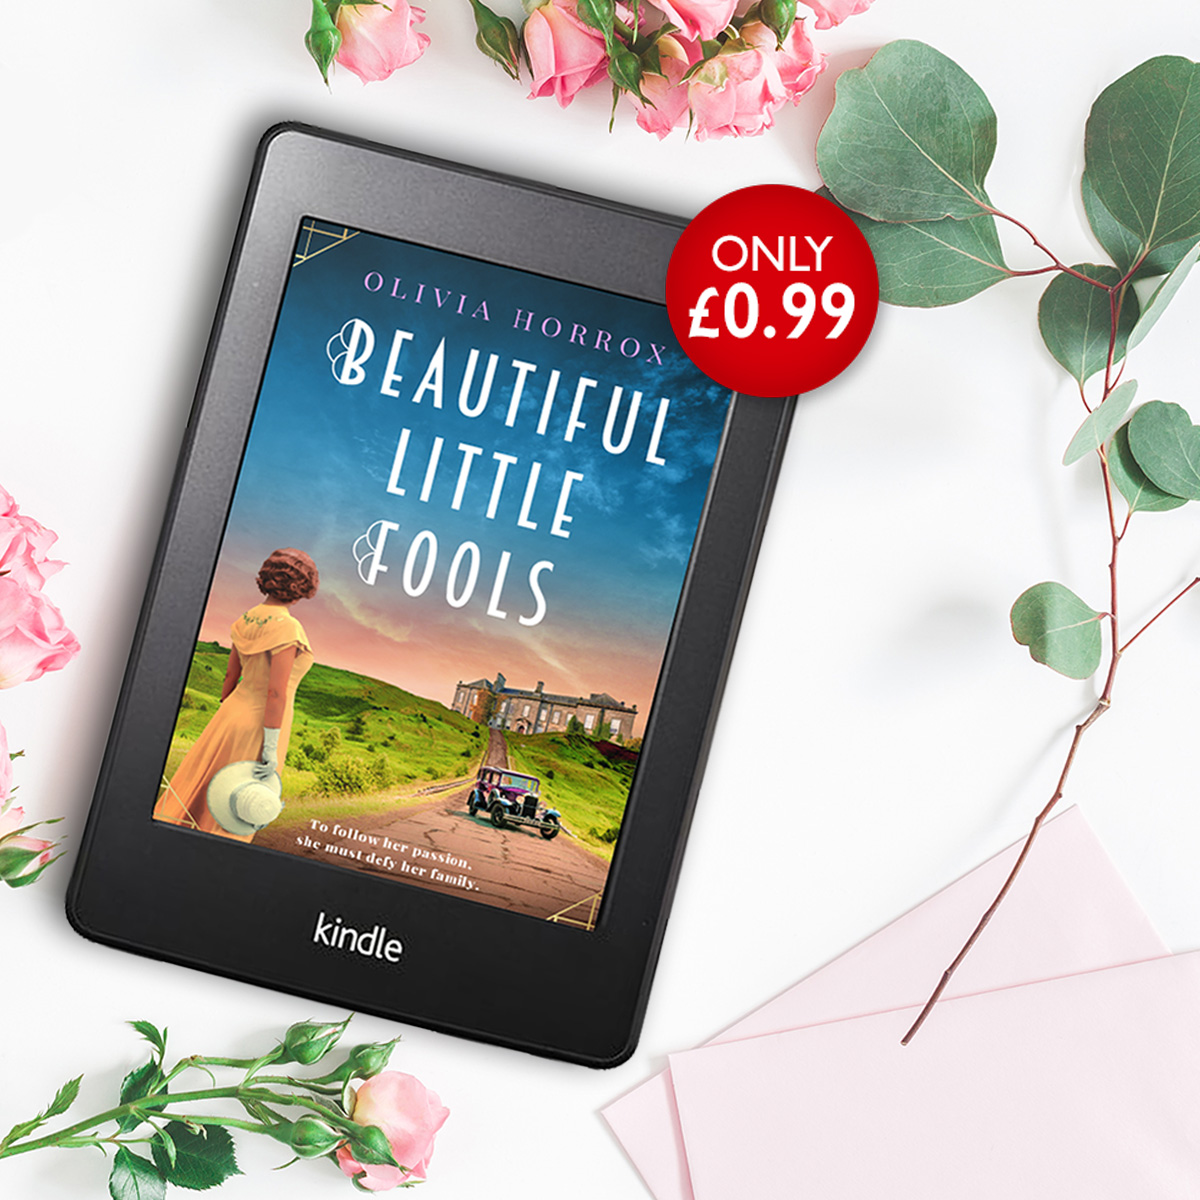 £0.99 offer ending soon! Grab this unmissable #historical read to fill your weekend! To follow her passion, she must defy her family... @ohorrox's stunning #historical novel will have you utterly addicted and sweep you away! Get your copy now! geni.us/BeautifulLittl…